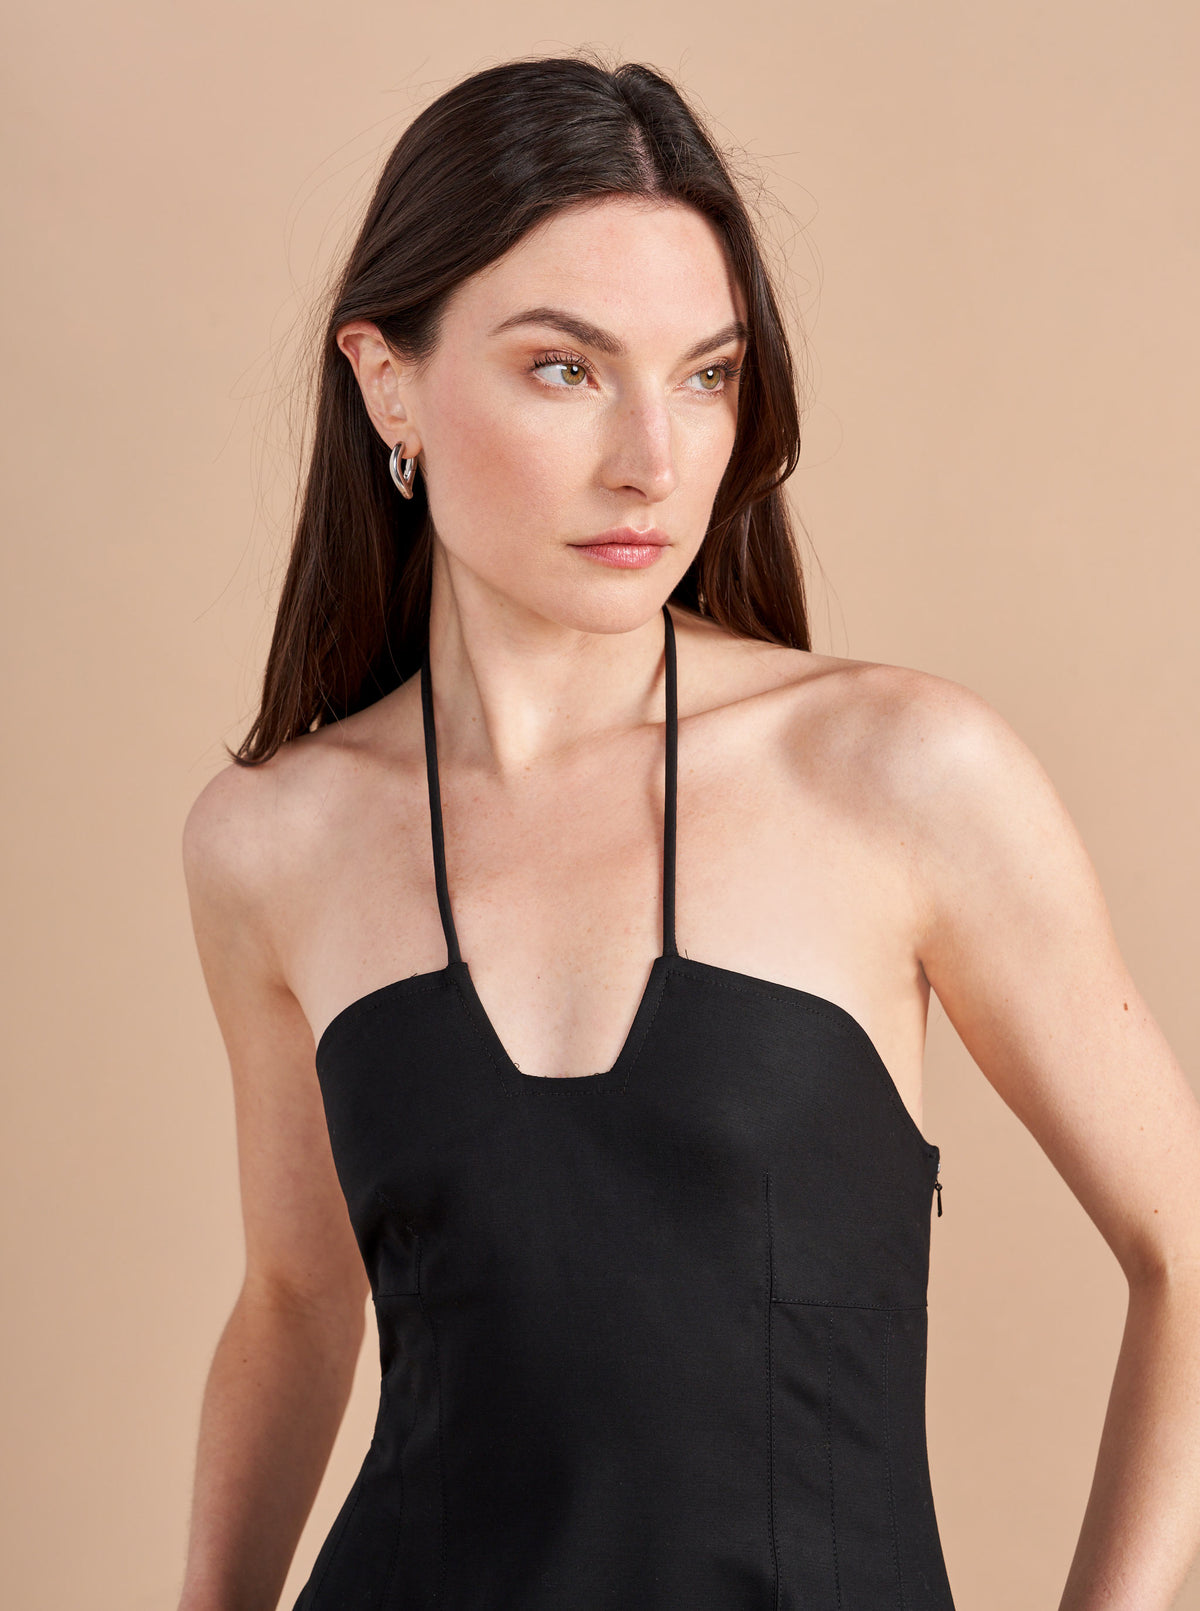 Some dresses are not meant to sit in your closet. This one will call your name so give in to the impulse, zip her up, and paint the town with this cotton stretch, halter neck, fit and flare frock. Dress up to get down. 